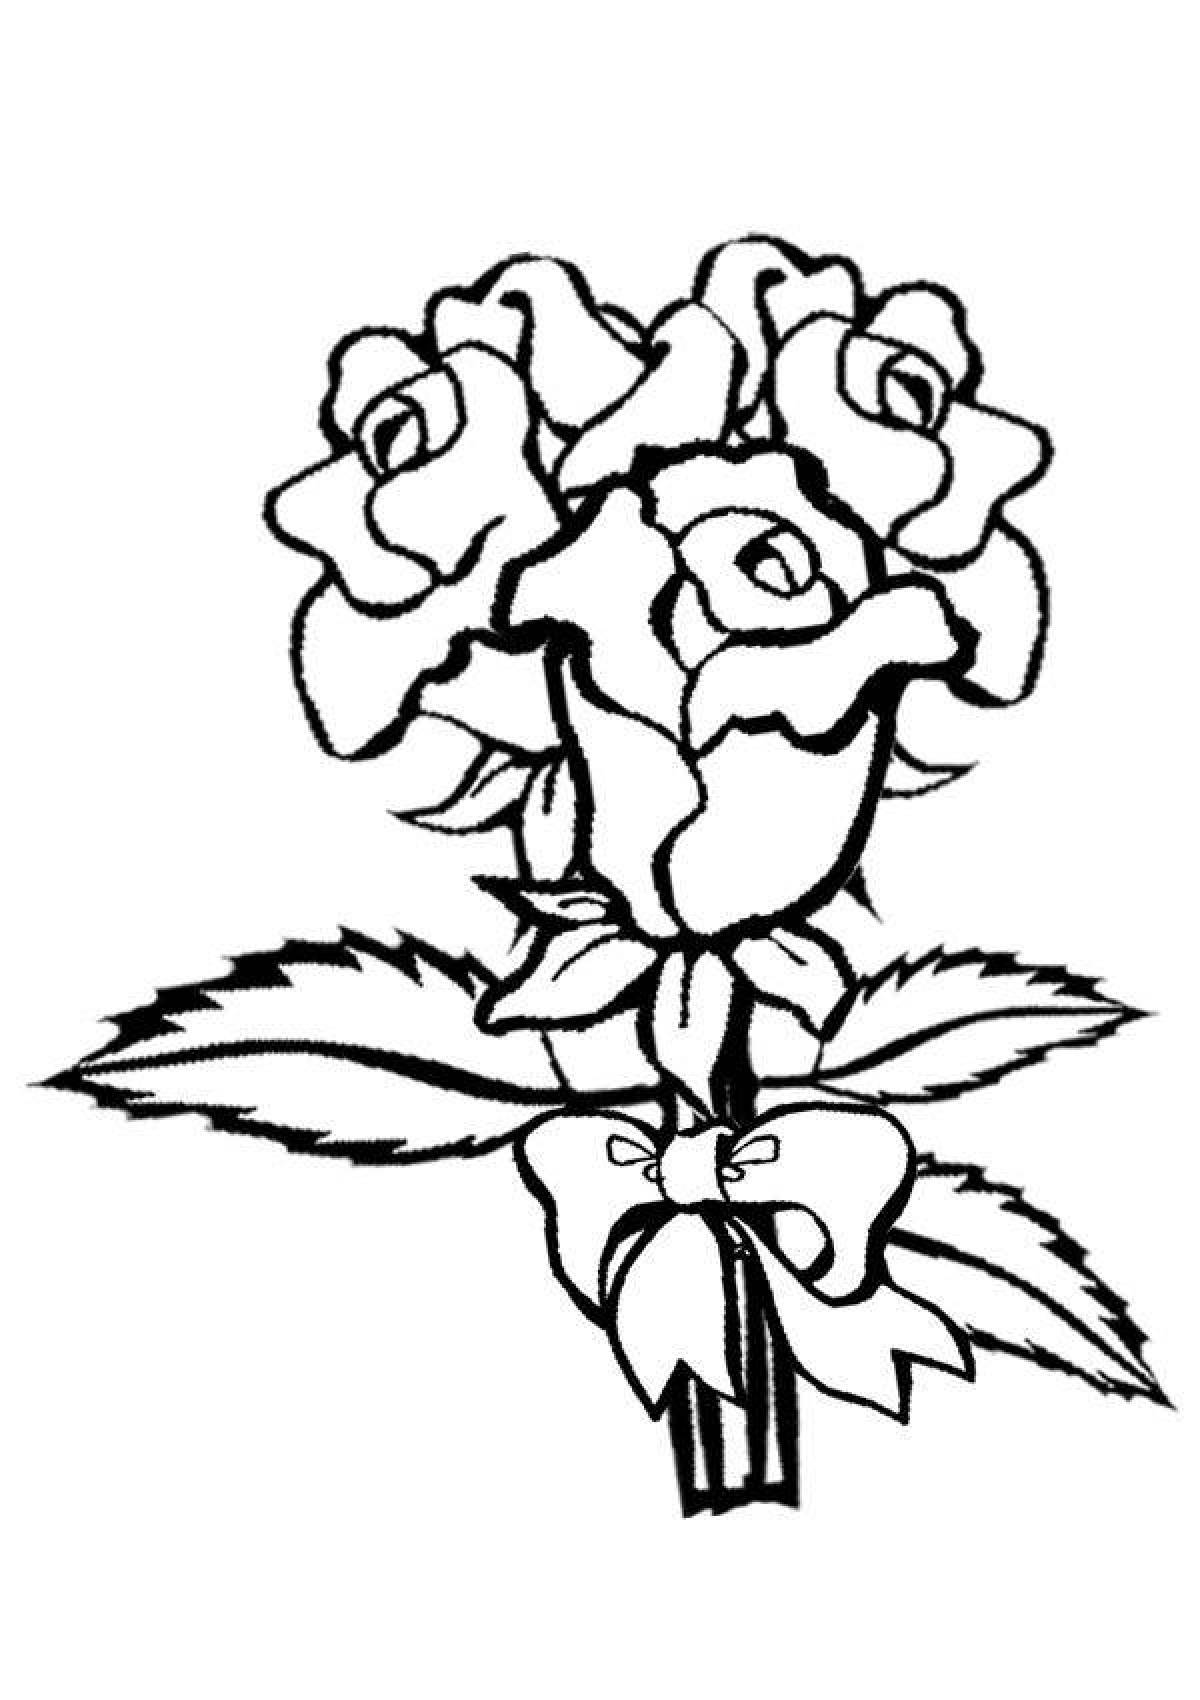 Coloring page charming bouquet of roses